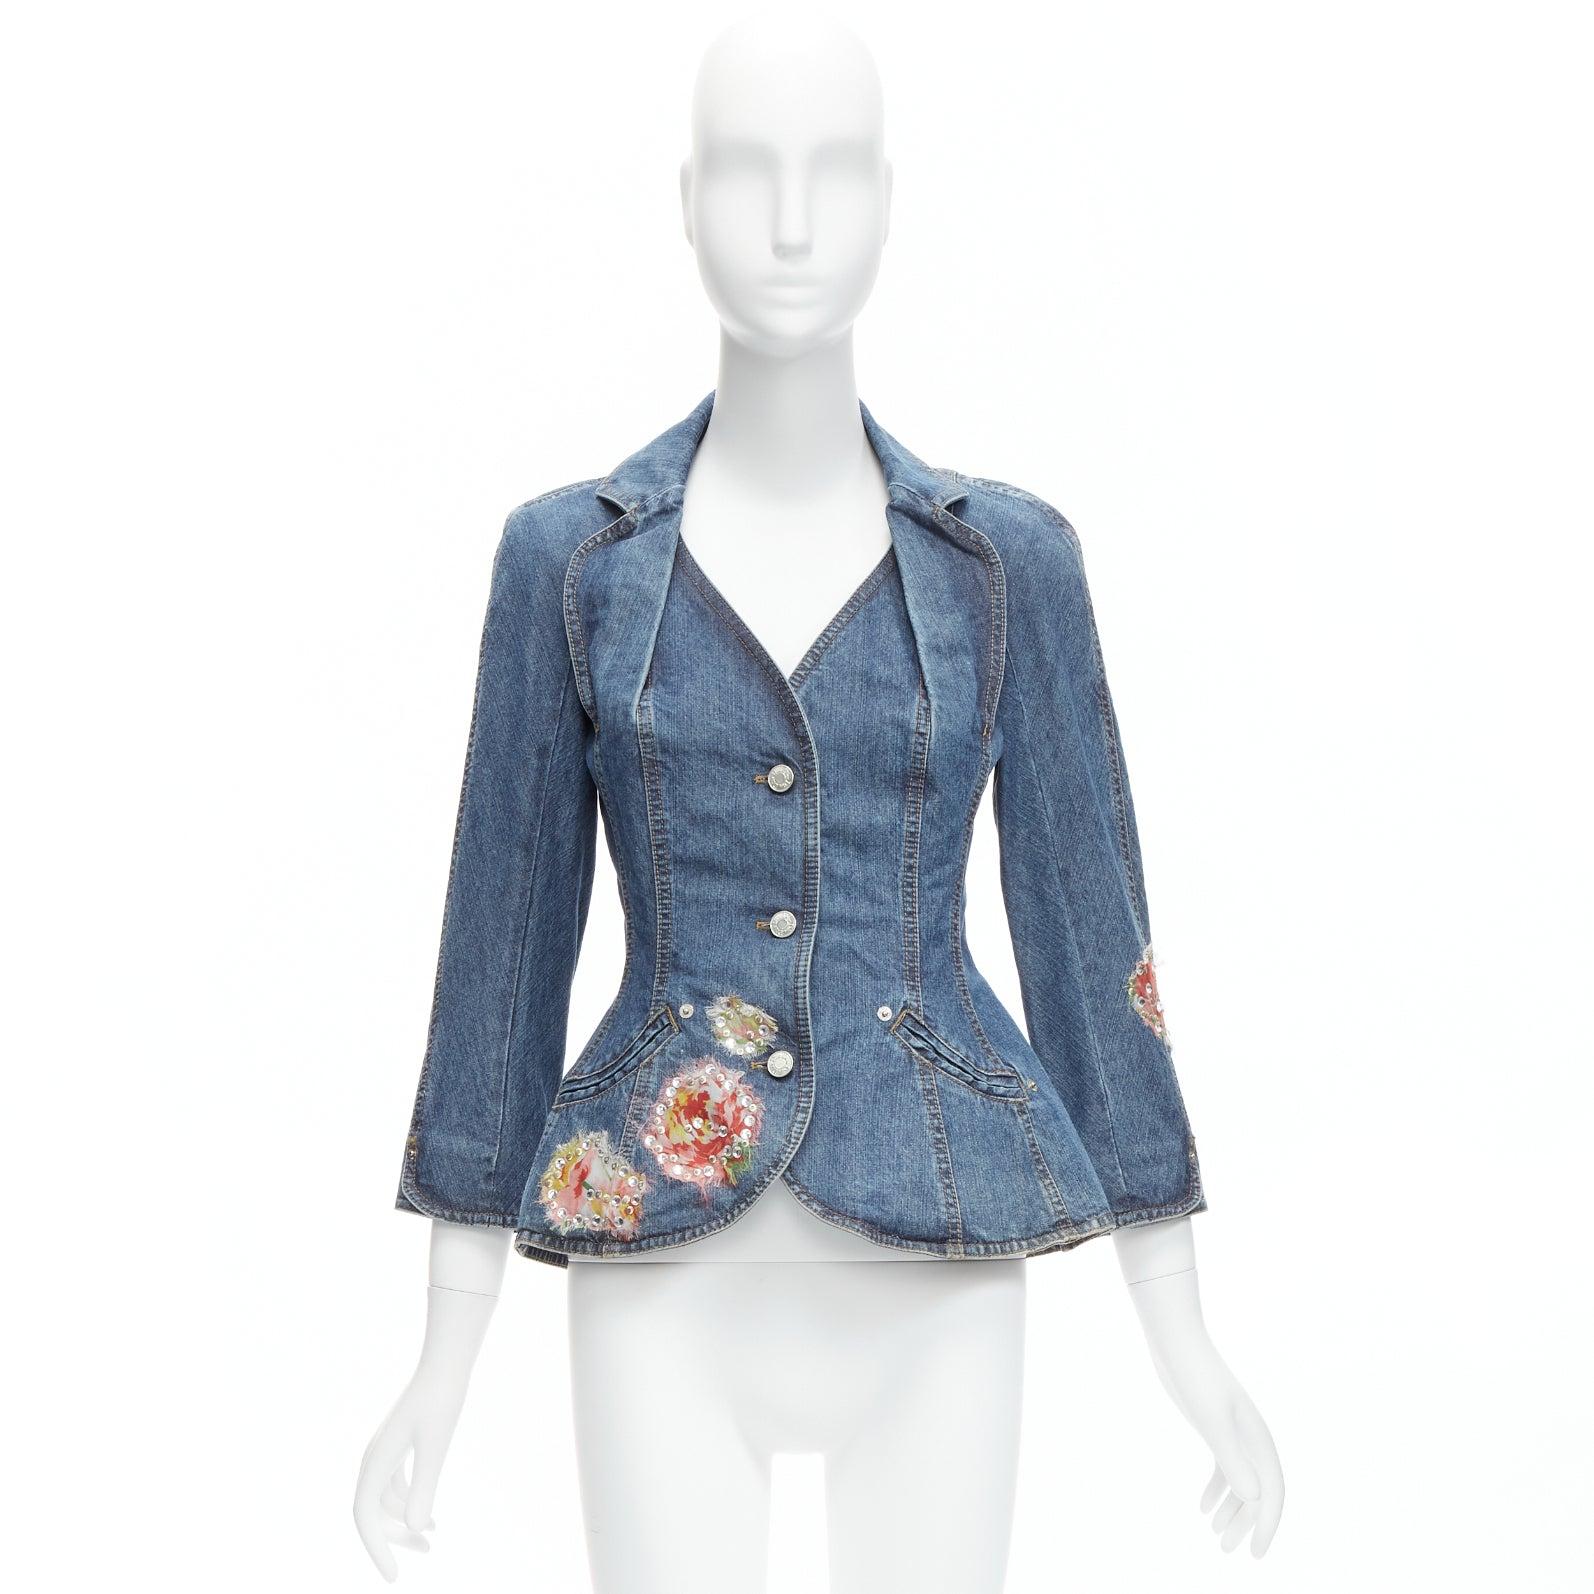 rare CHRISTIAN DIOR JOHN GALLIANO Vintage blue denim crystal floral deconstructed collar bar jacket FR40 L
Reference: TGAS/D00448
Brand: Christian Dior
Designer: John Galliano
Material: Denim
Color: Blue
Pattern: Solid
Closure: Button
Lining: Blue